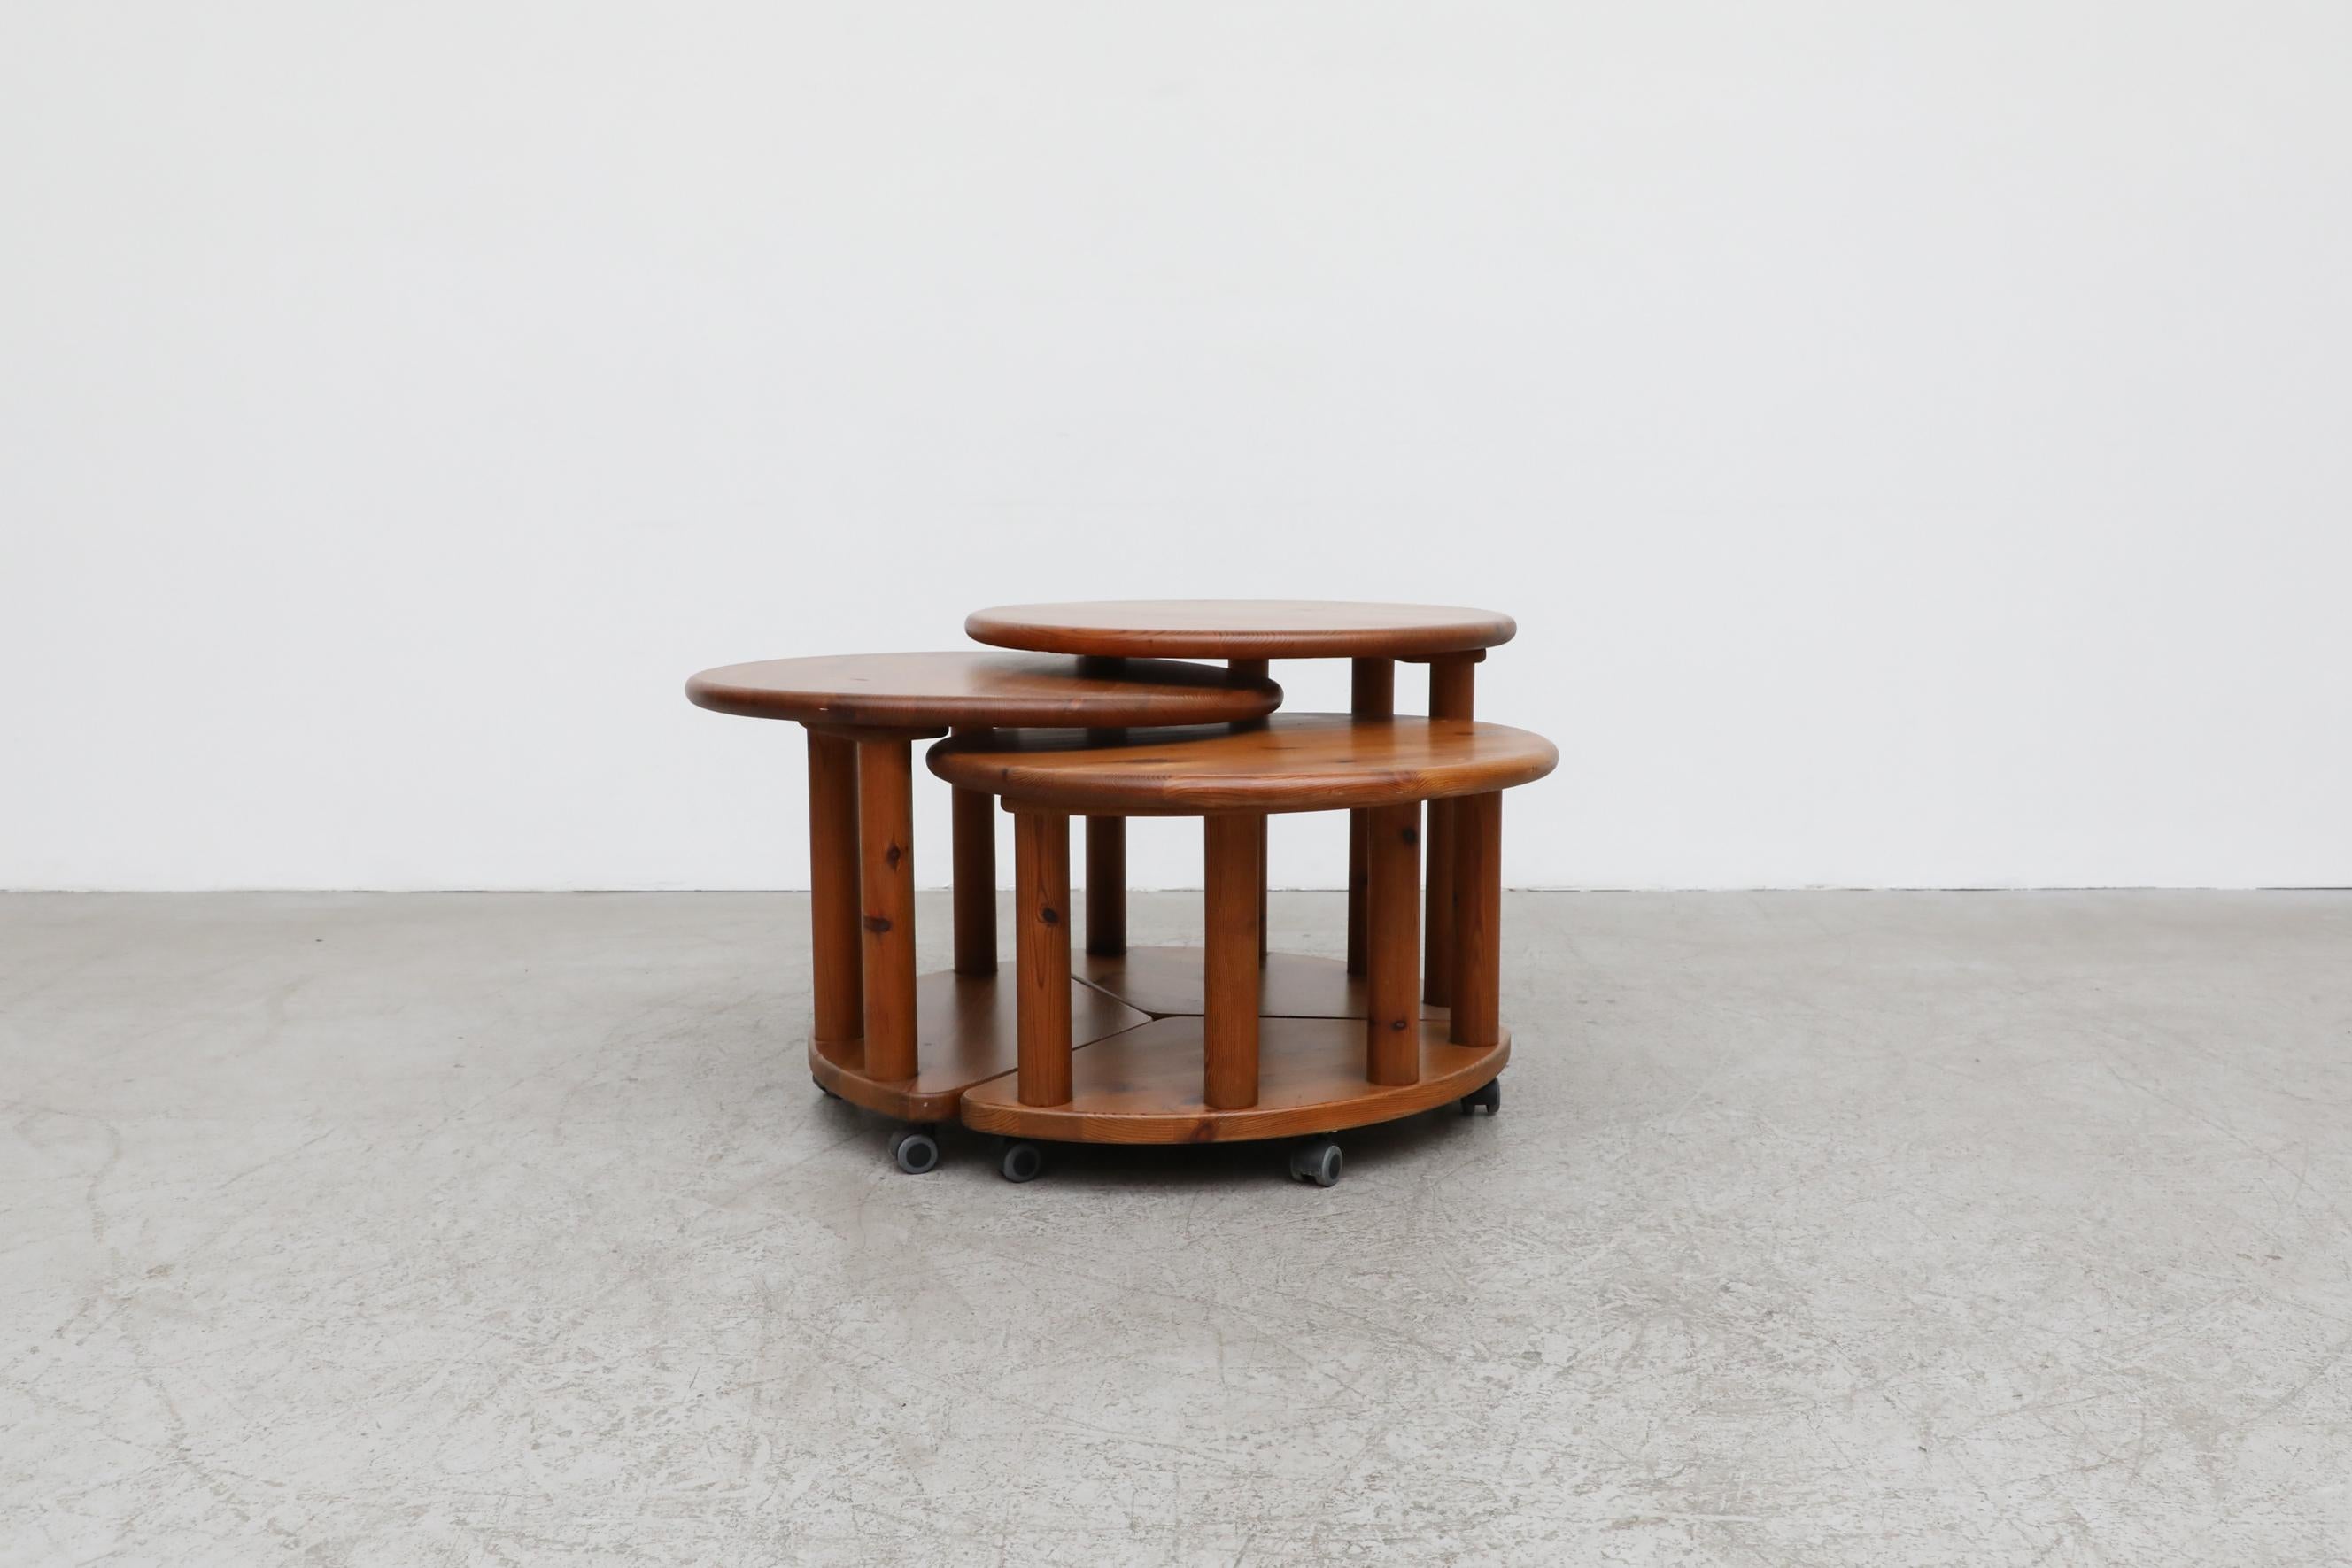 Set of 3 solid pine Rainer Daumiller (attr) round nesting tables on rollers. Each table is 25.25 round. In original condition with visible wear. Wear is consistent with its age and use.